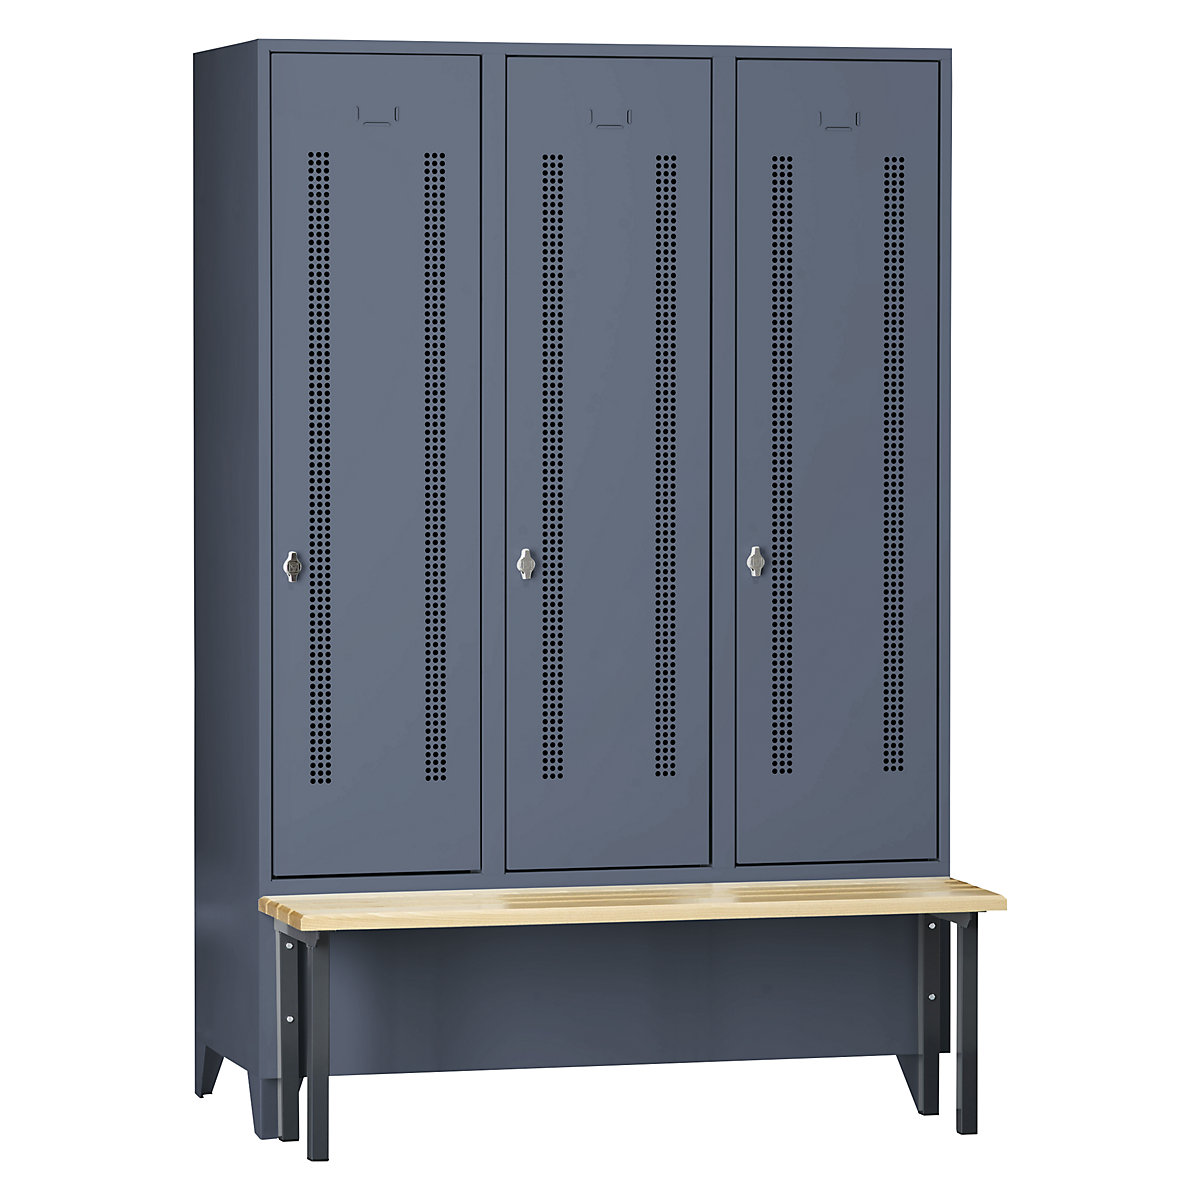 Clothes locker with bench mounted in front - Wolf